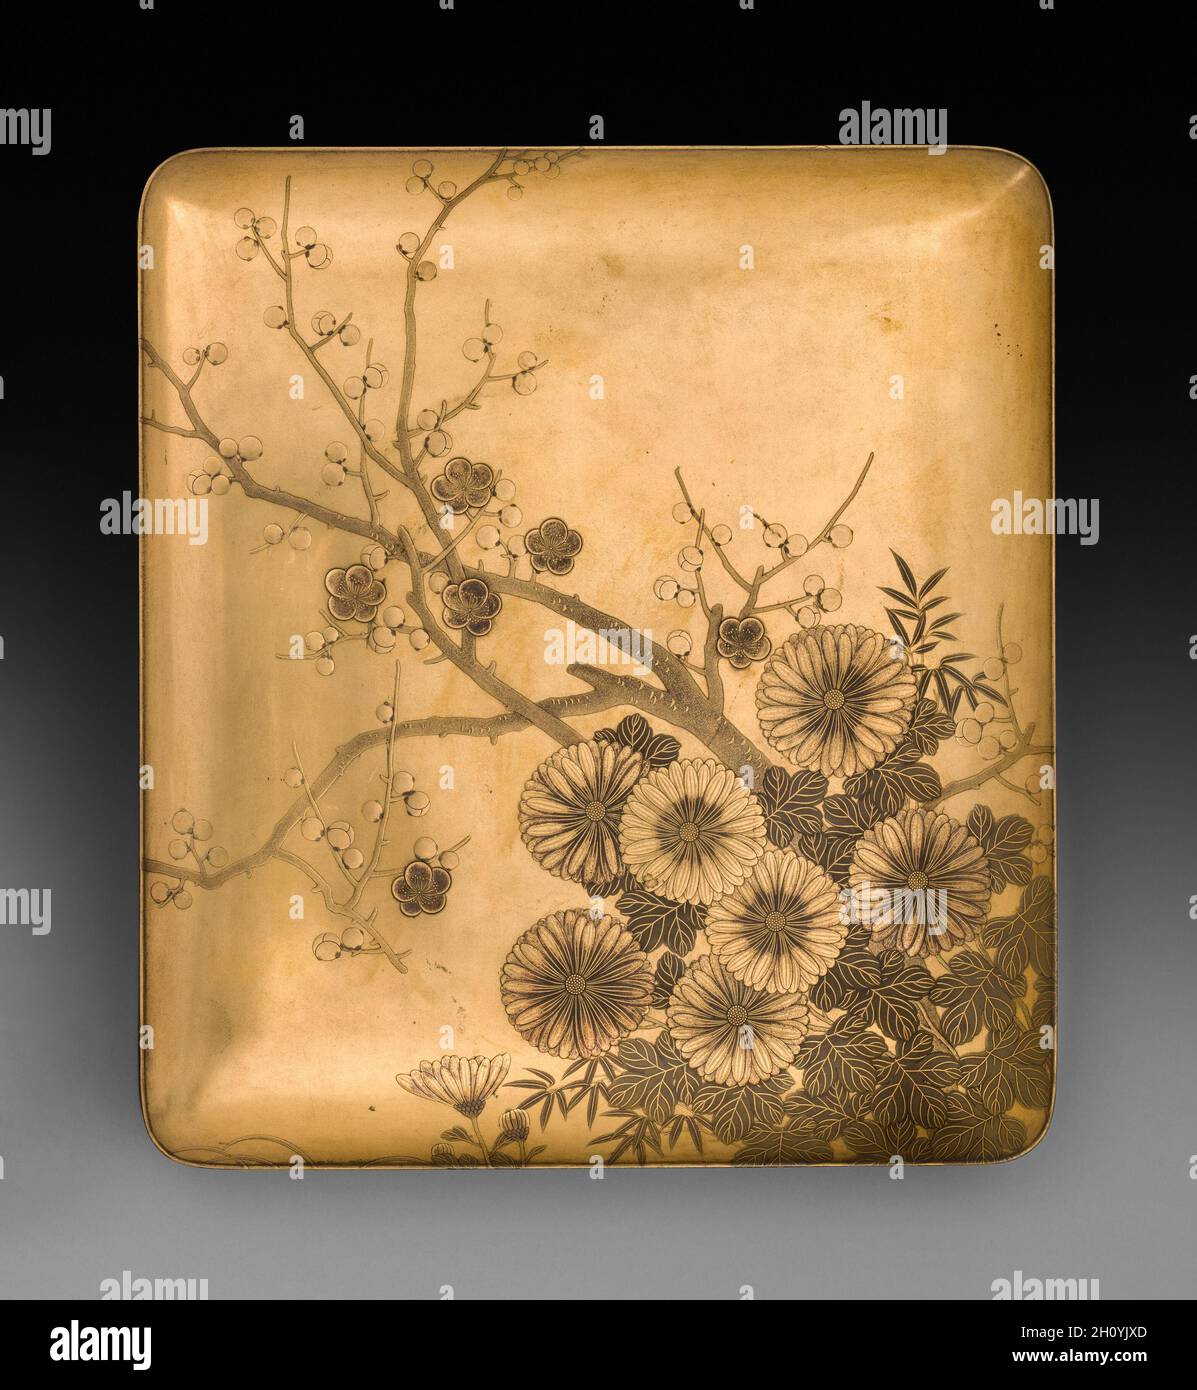 Lid of Writing Box (Suzuribako) with Chrysanthemum and Plum, late 1800s-early 1900s. Japan. Lacquer over wood with gold and silver sprinkled powder (maki-e);  Both functional and elegant, this is a container for an ink stone, brushes, and ink from a set of writing tools that included a larger box for paper. Against a sleek gold lacquered ground, its artist has used restraint in sprinkled powder decoration (maki-e) to produce the design of cockscomb and harvested rice on the interior of the lid. Stock Photo